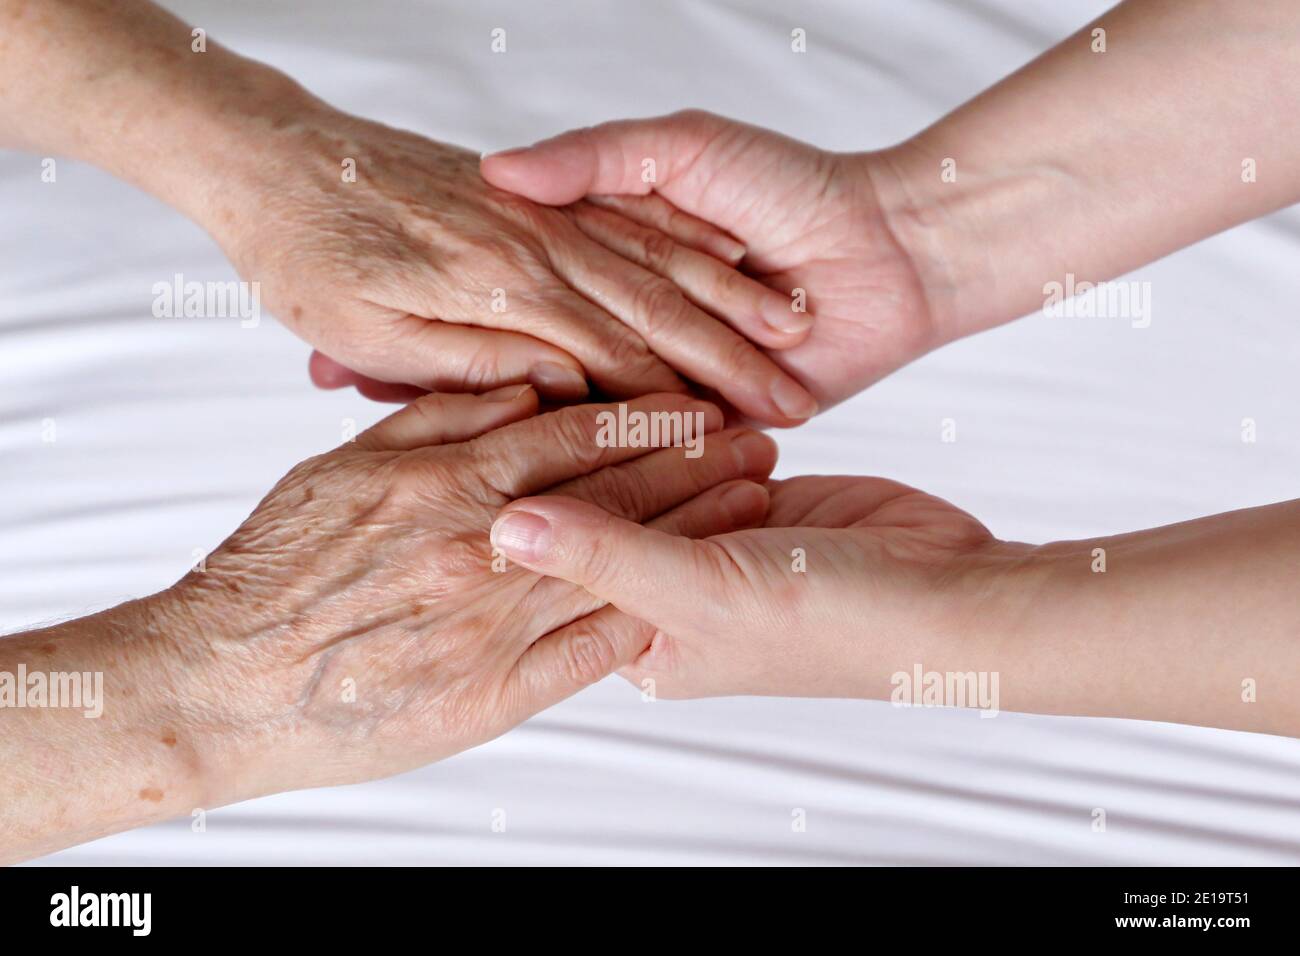 Wrinkled hands of senior woman in the palms of a young woman. Concept of care and support, elderly mother and daughter Stock Photo